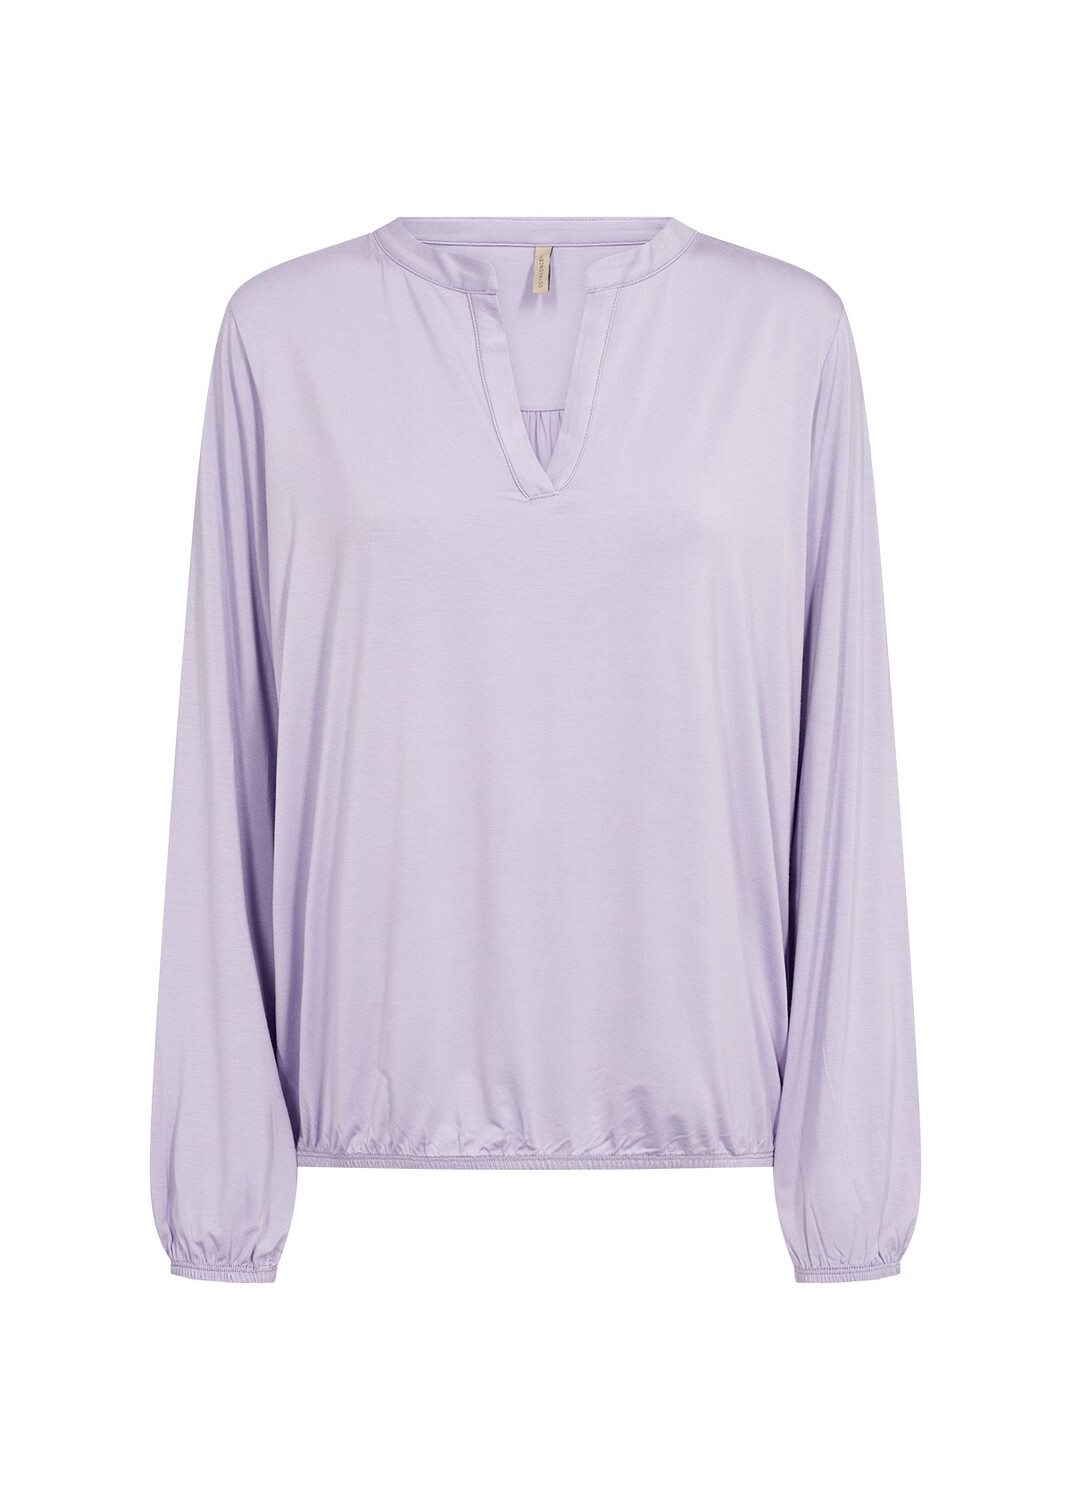 SOYACONCEPT MARICA TOP - LILAC